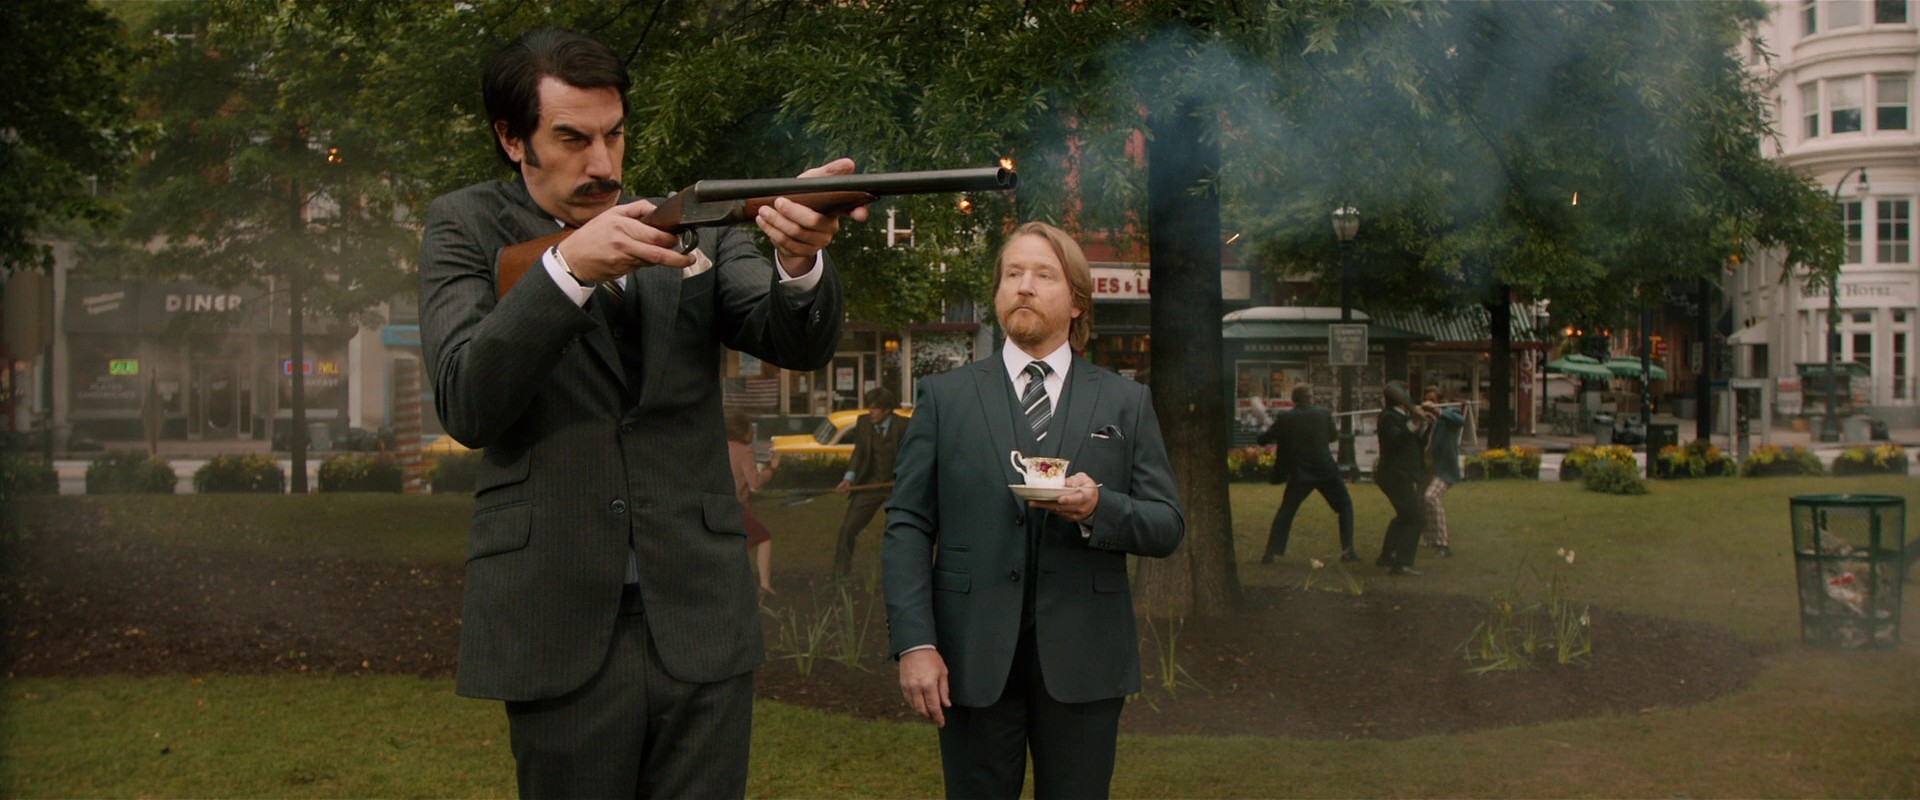 Anchorman 2: The Legend Continues. 